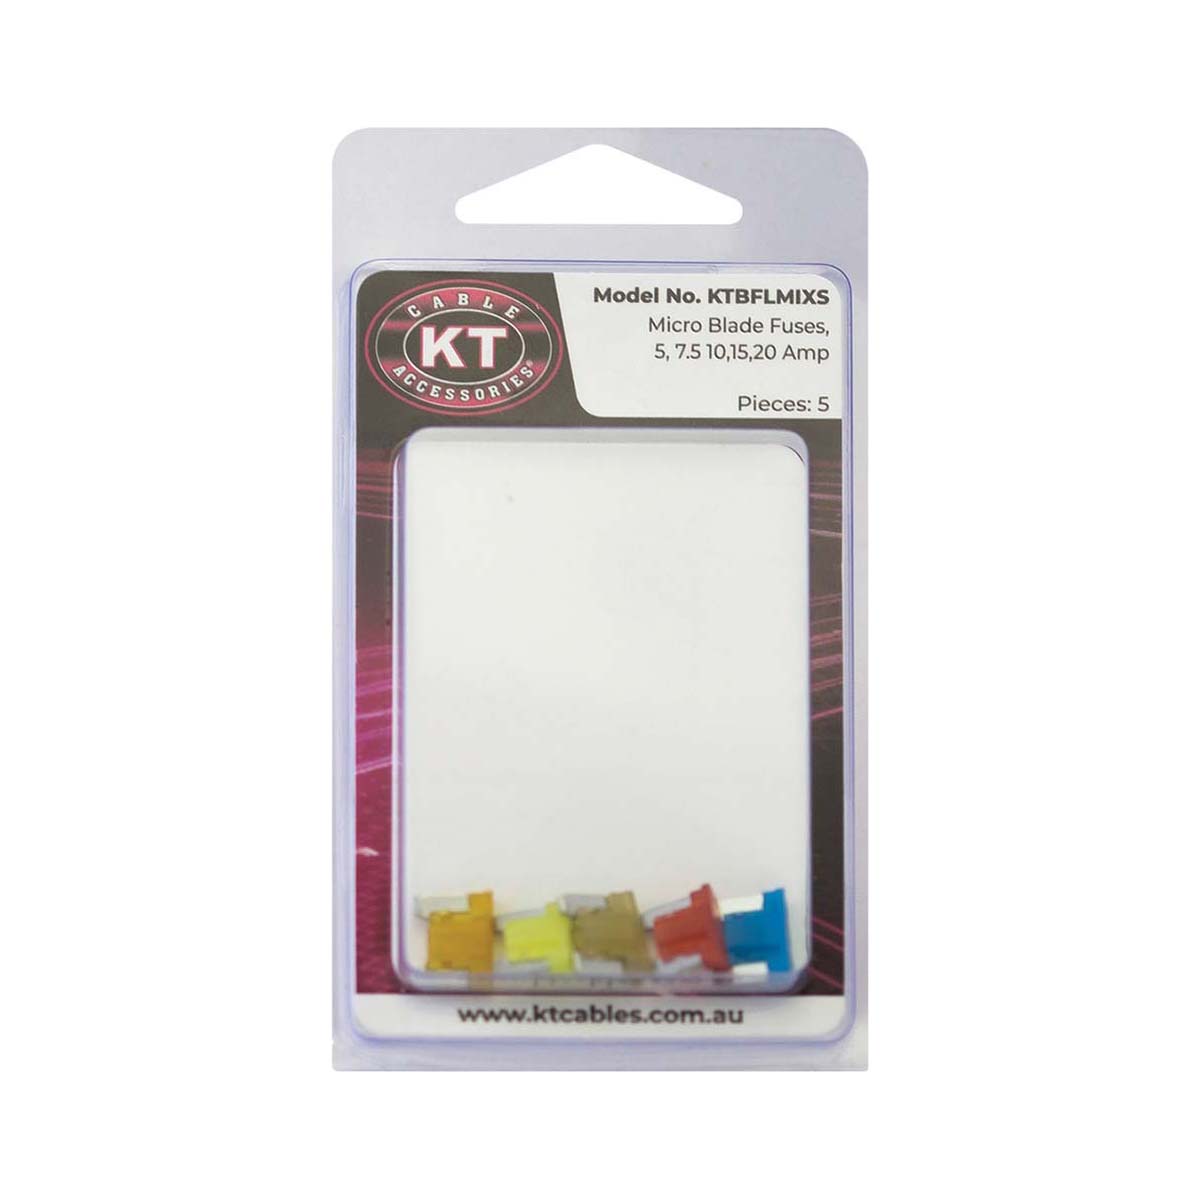 KT Cables Assorted Micro Blade Fuse 5 Pack